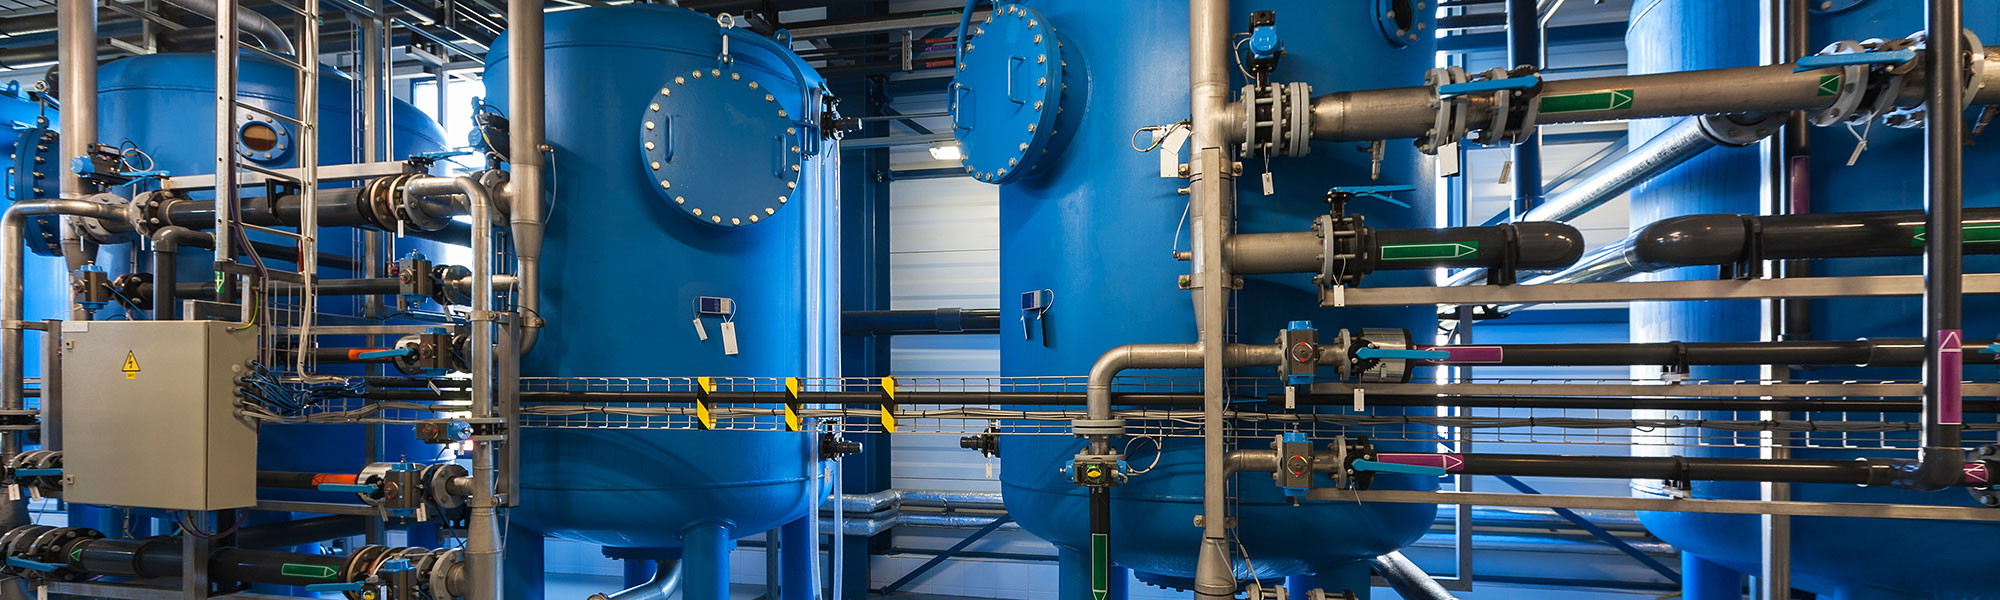 Power Plant Water Filtration Services